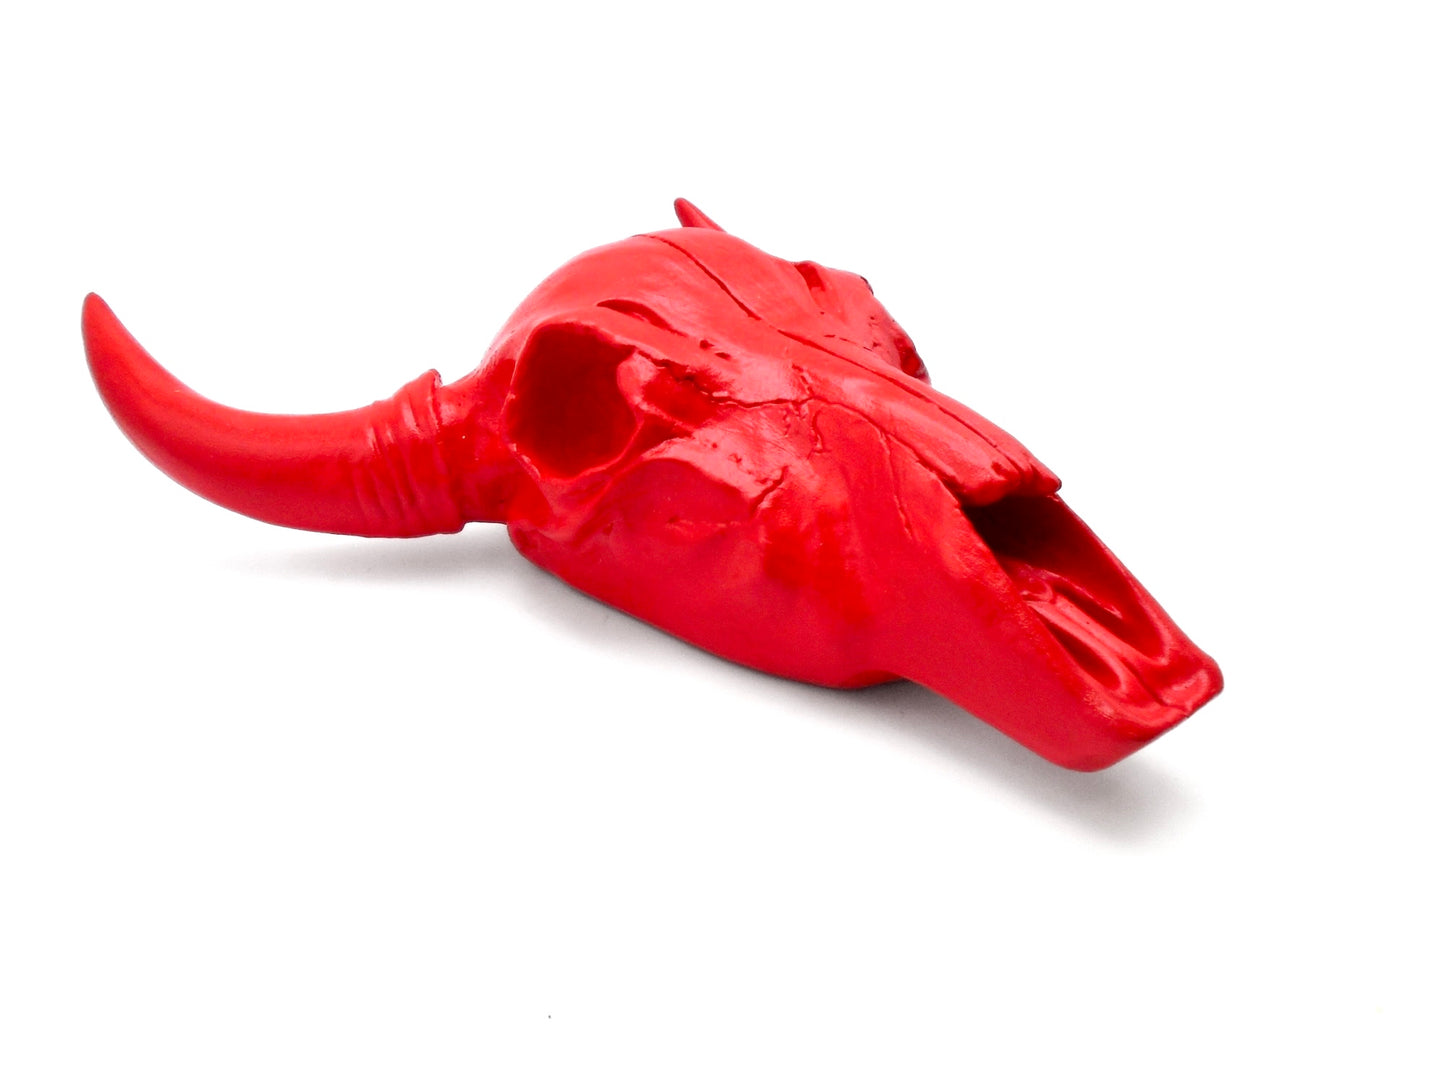 SAVAGE CHERRY RED COW SKULL